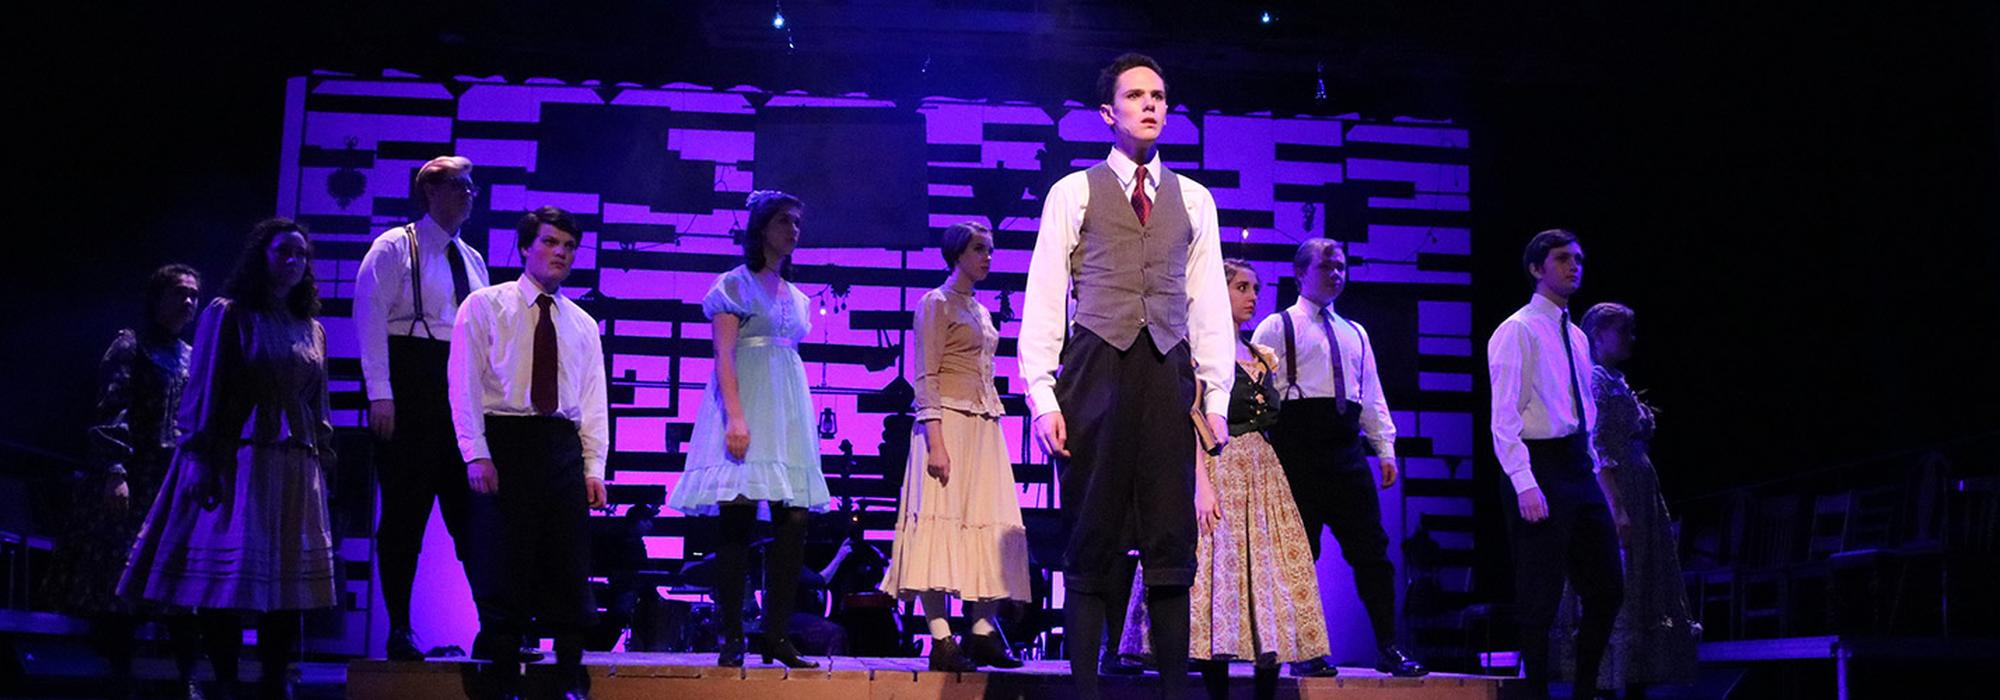 Morris students in a production of the Spring Awakening musical.